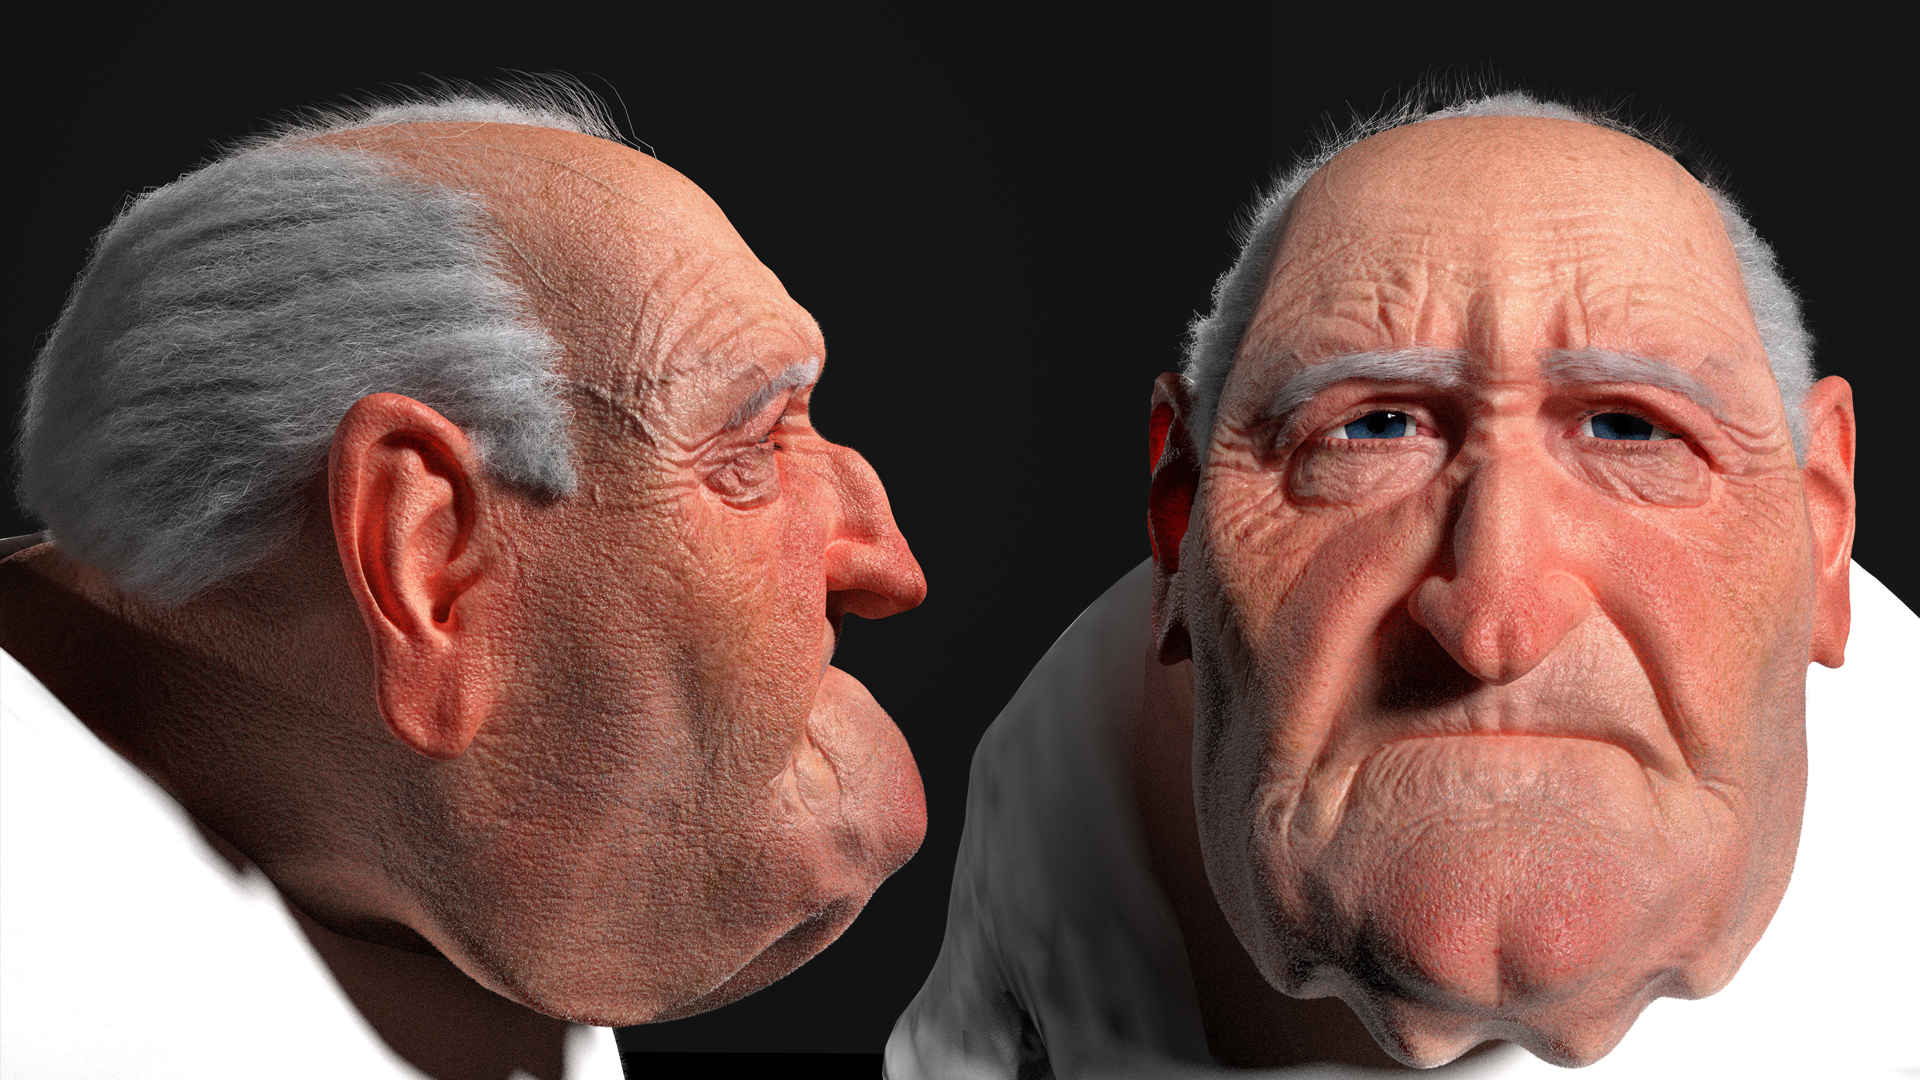 Old Man Pixar Style Final - Finished Projects - Blender Artists Community